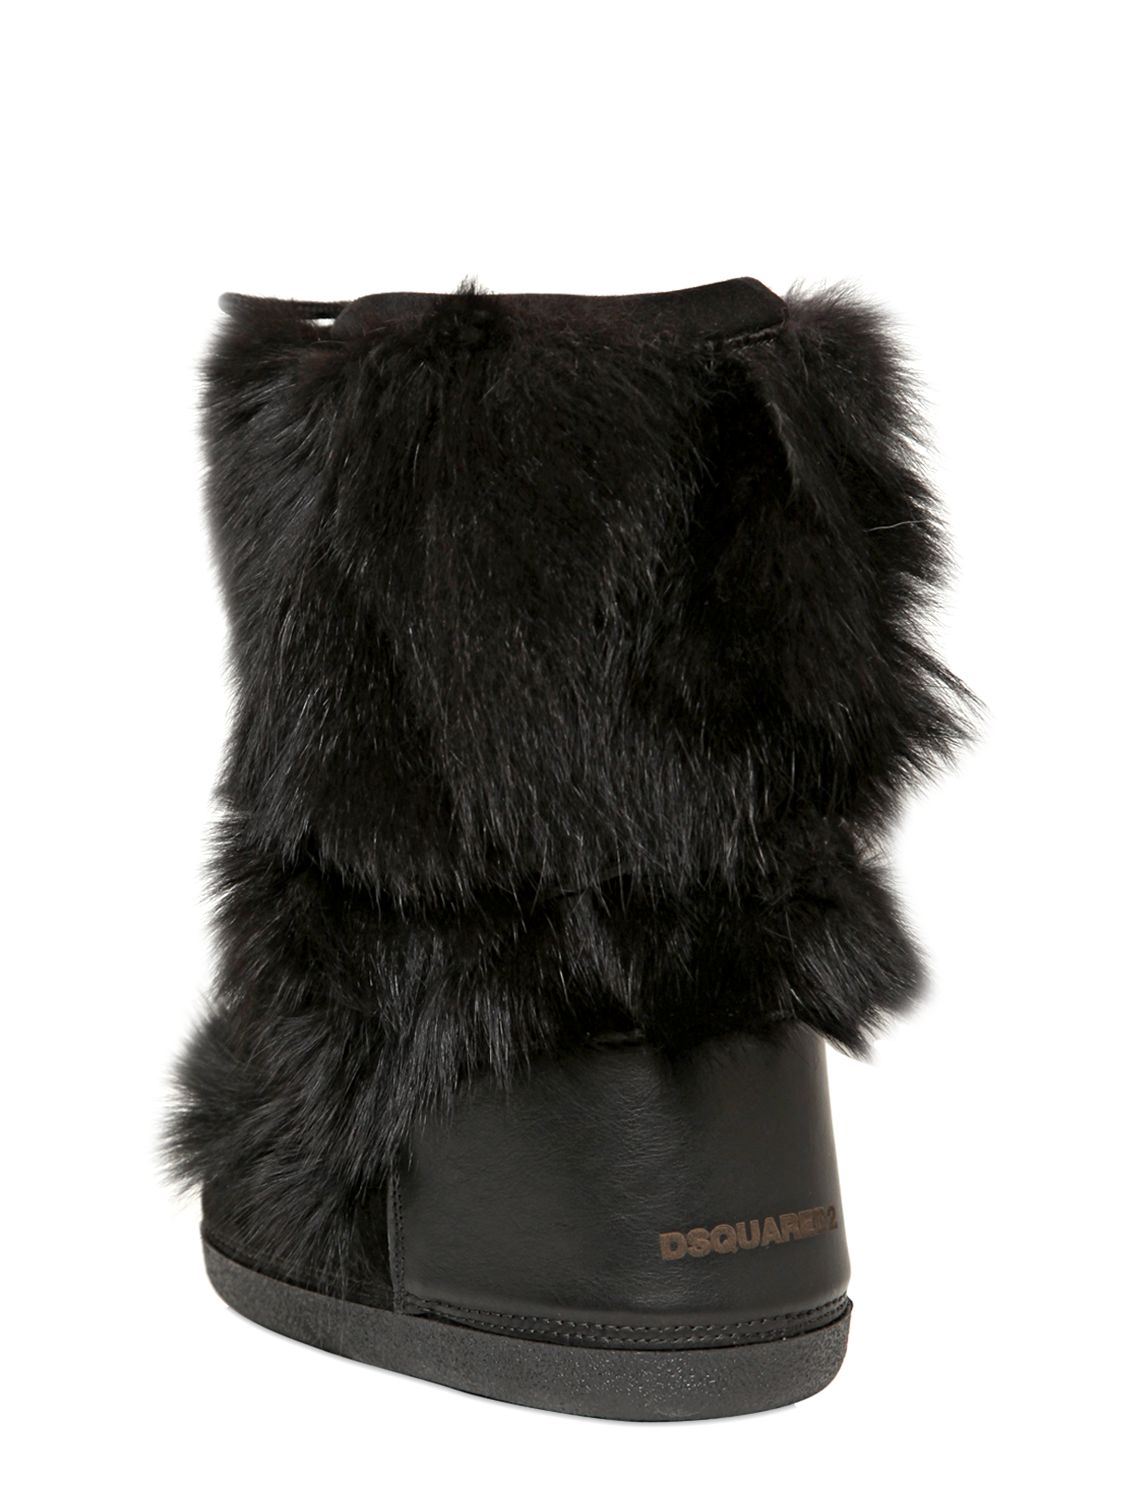 DSquared² Fox Fur Suede Snow Boots in Black | Lyst